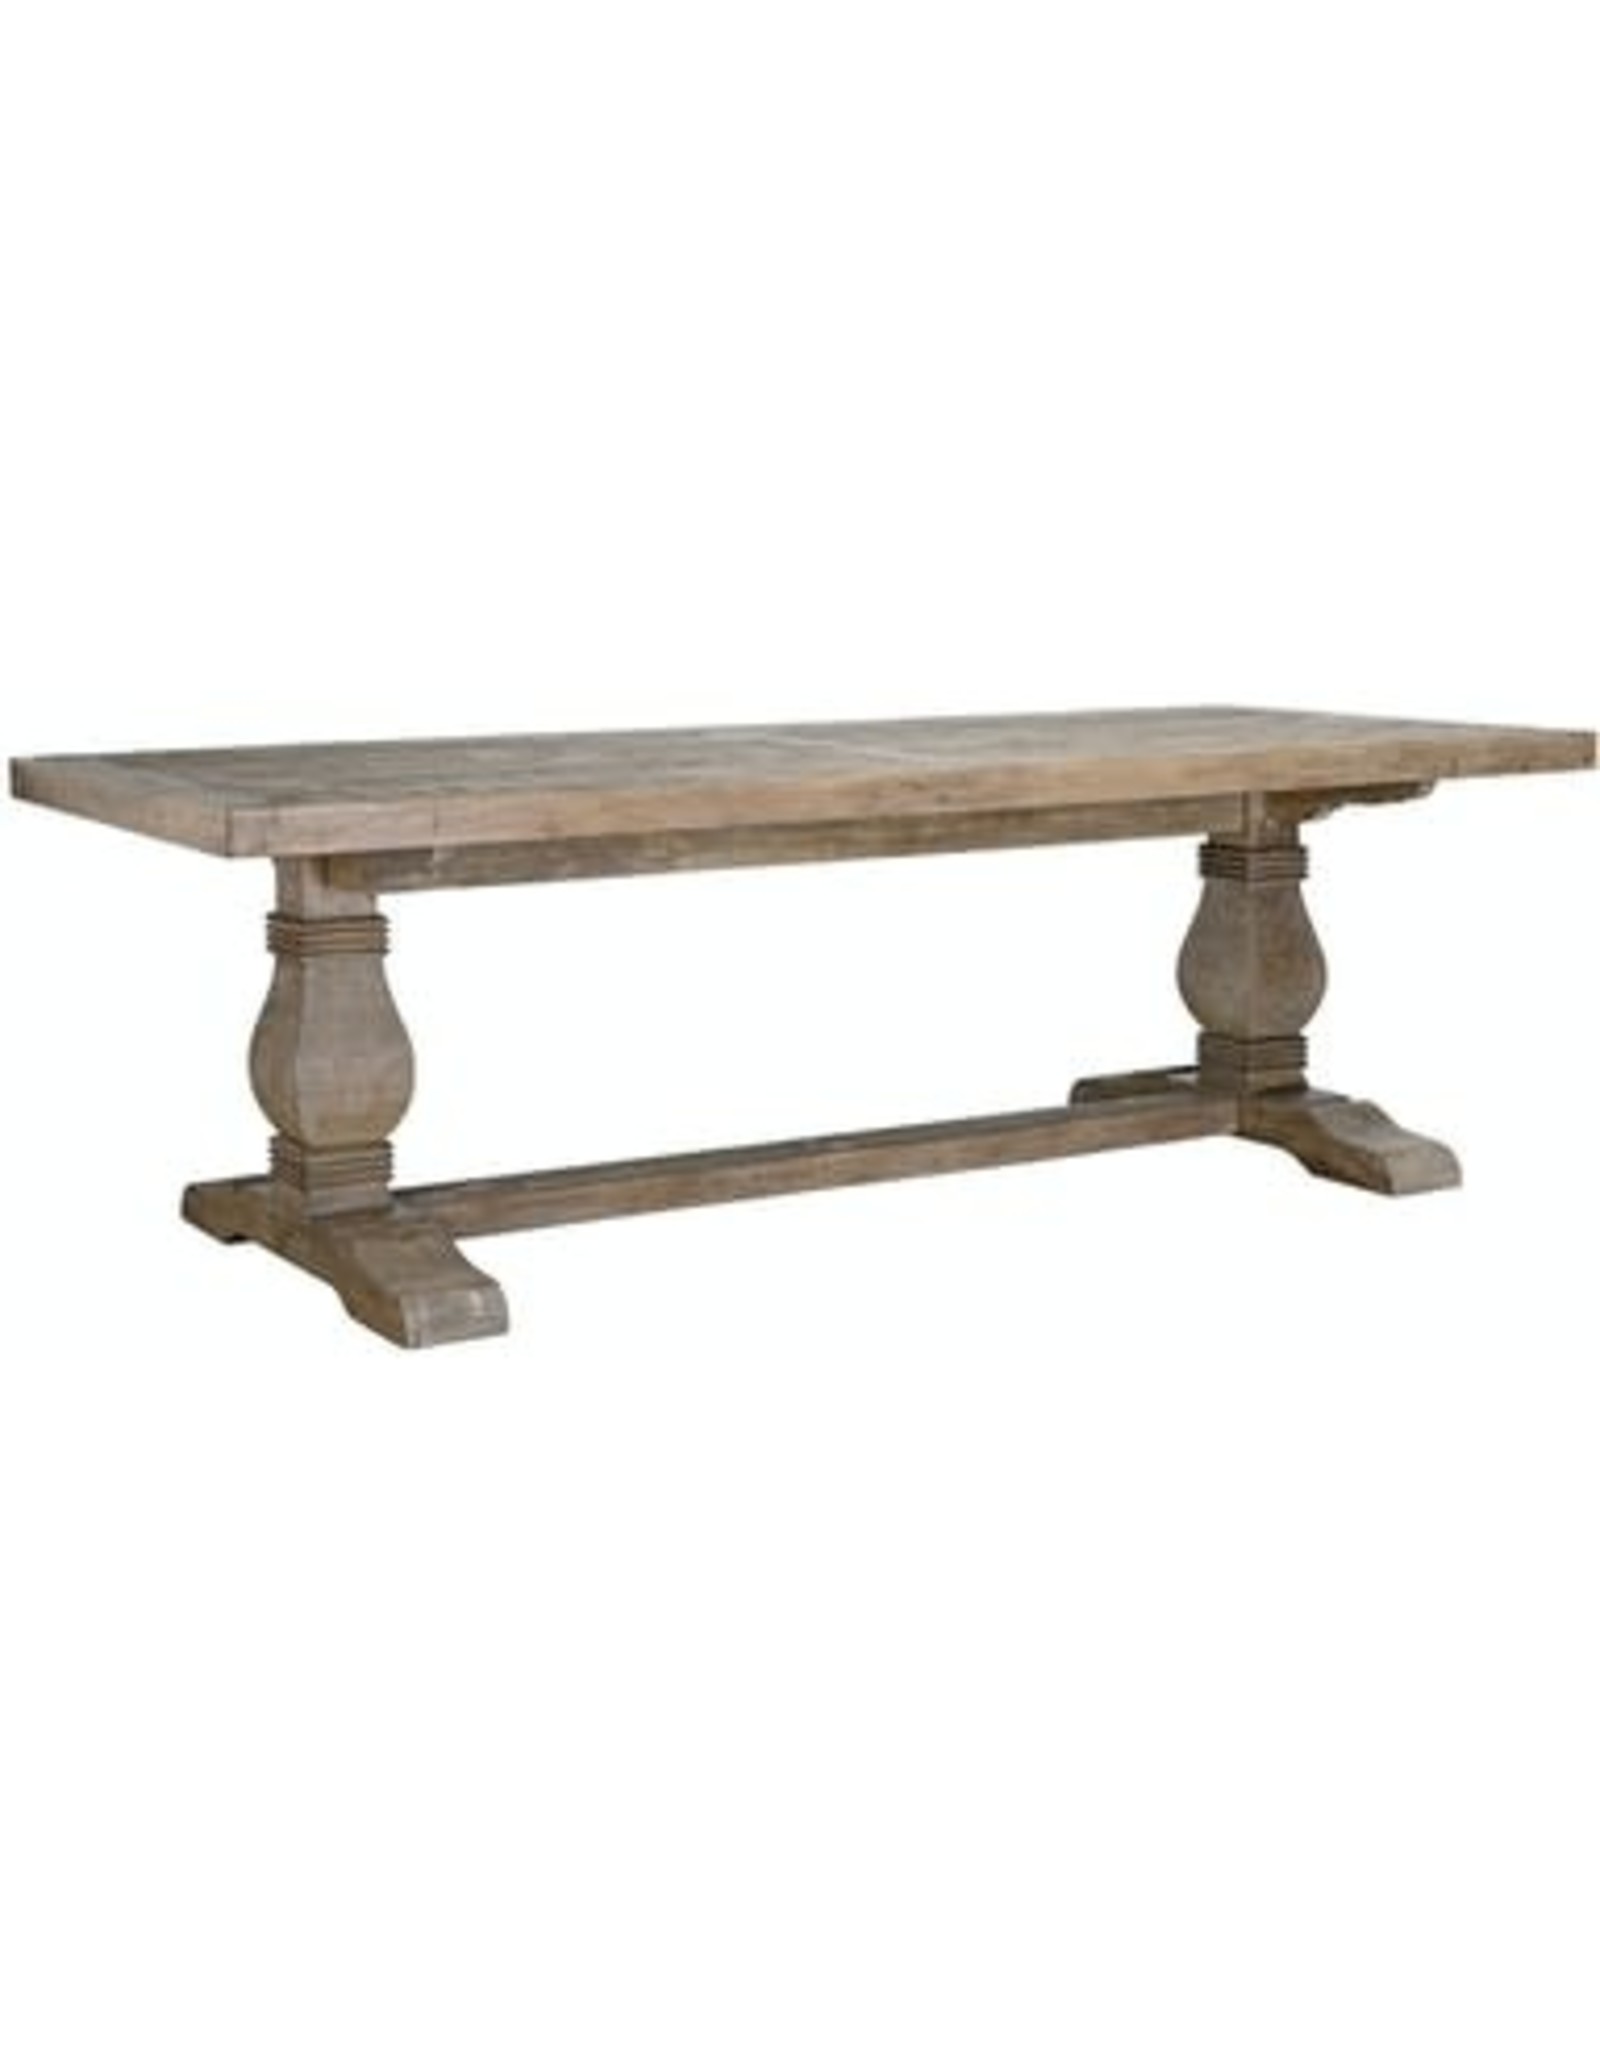 51030613 Caleb Dining Table 78"